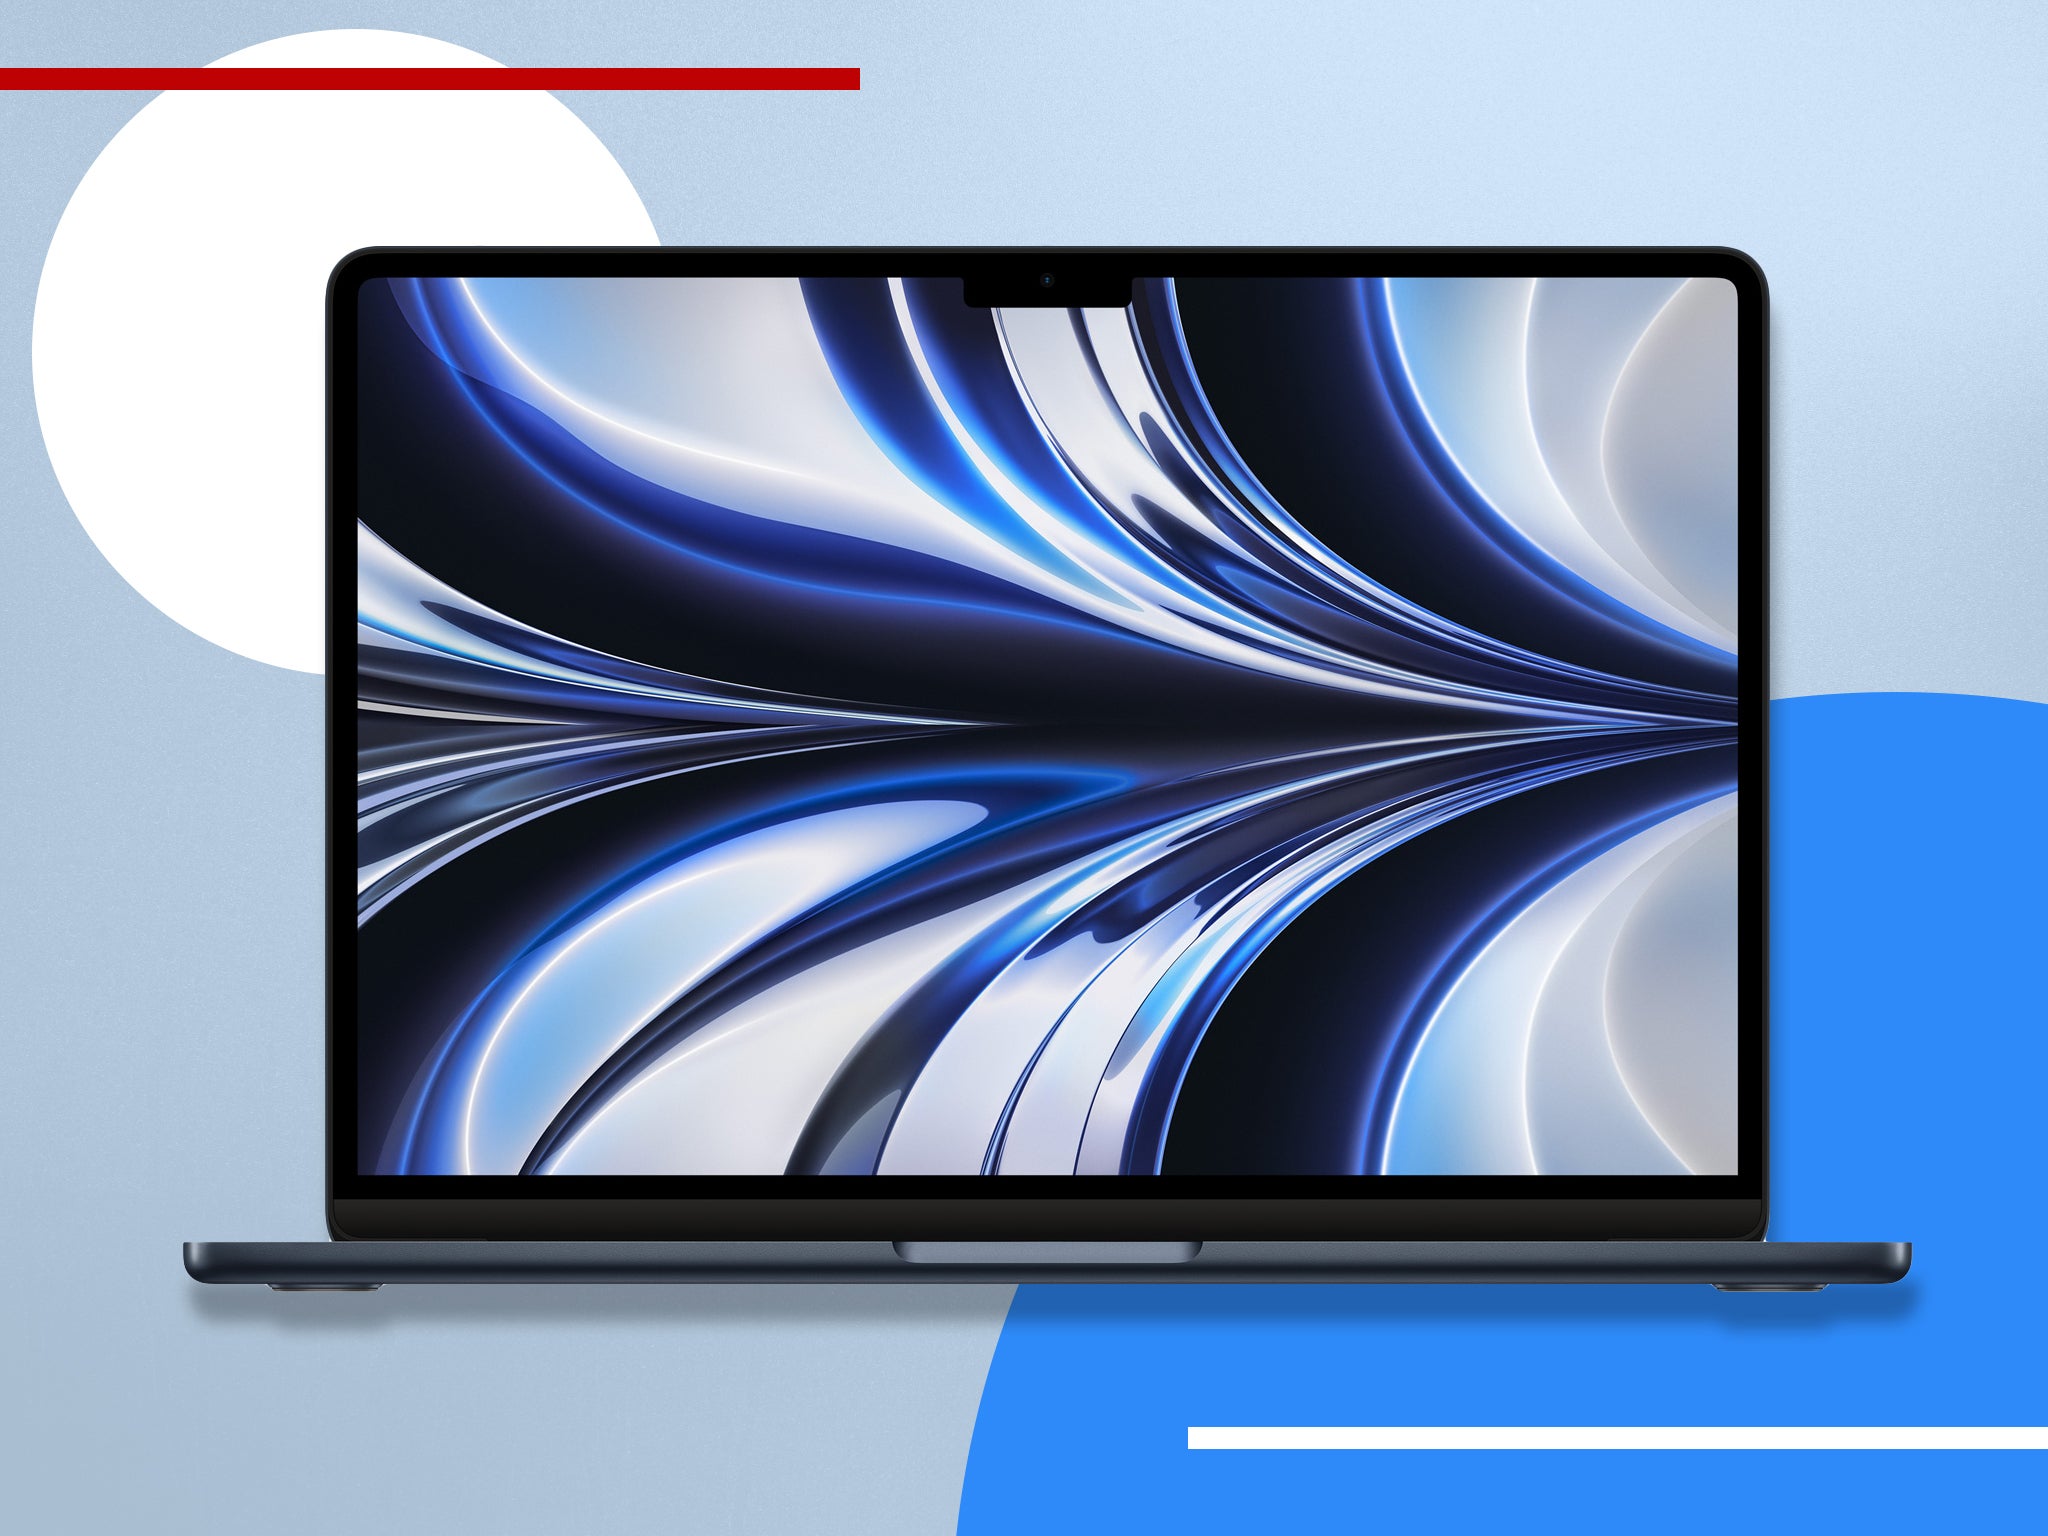 Speeds are up to 40 per cent faster while the display is bigger, brighter and pin-sharp